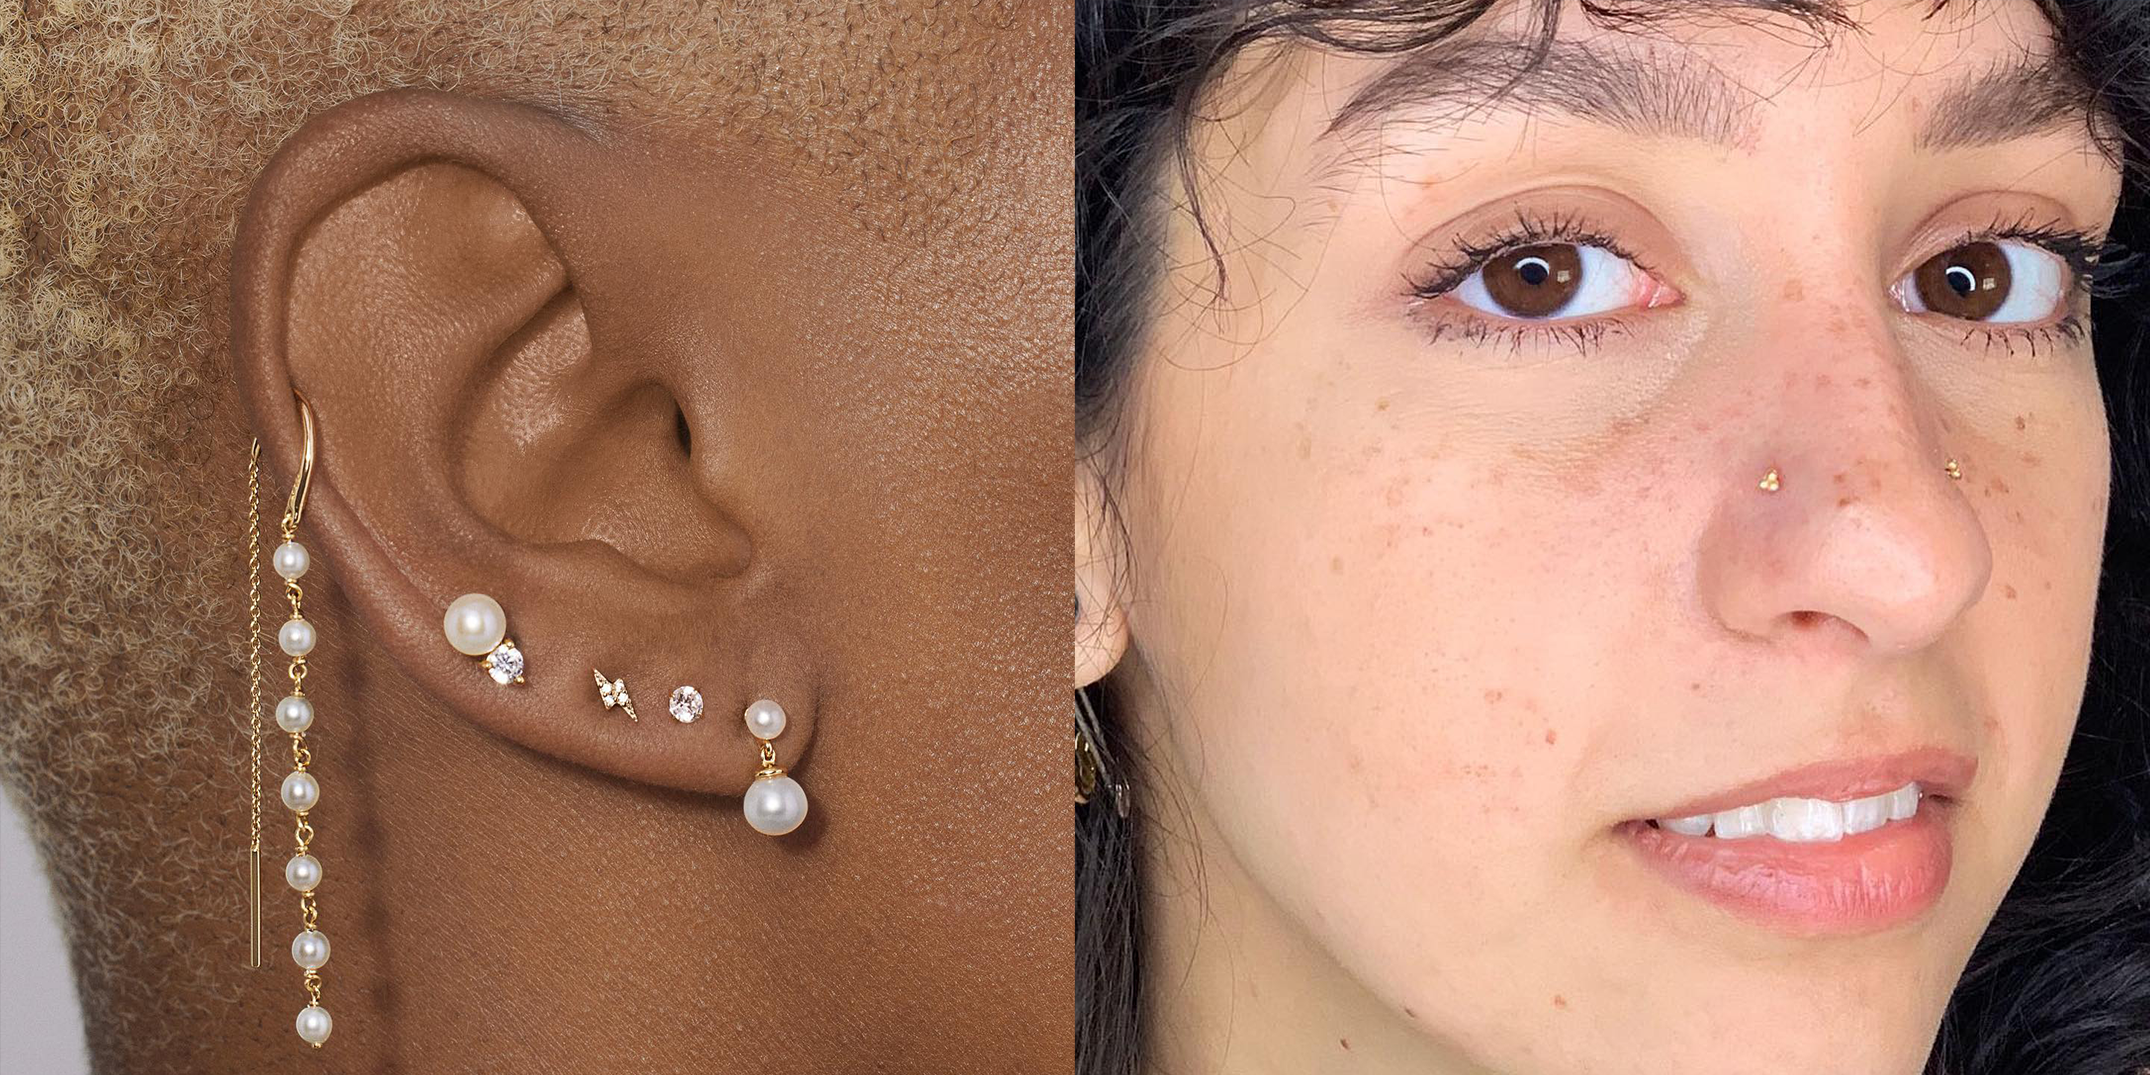 Ear Piercing Combinations That Look the Best